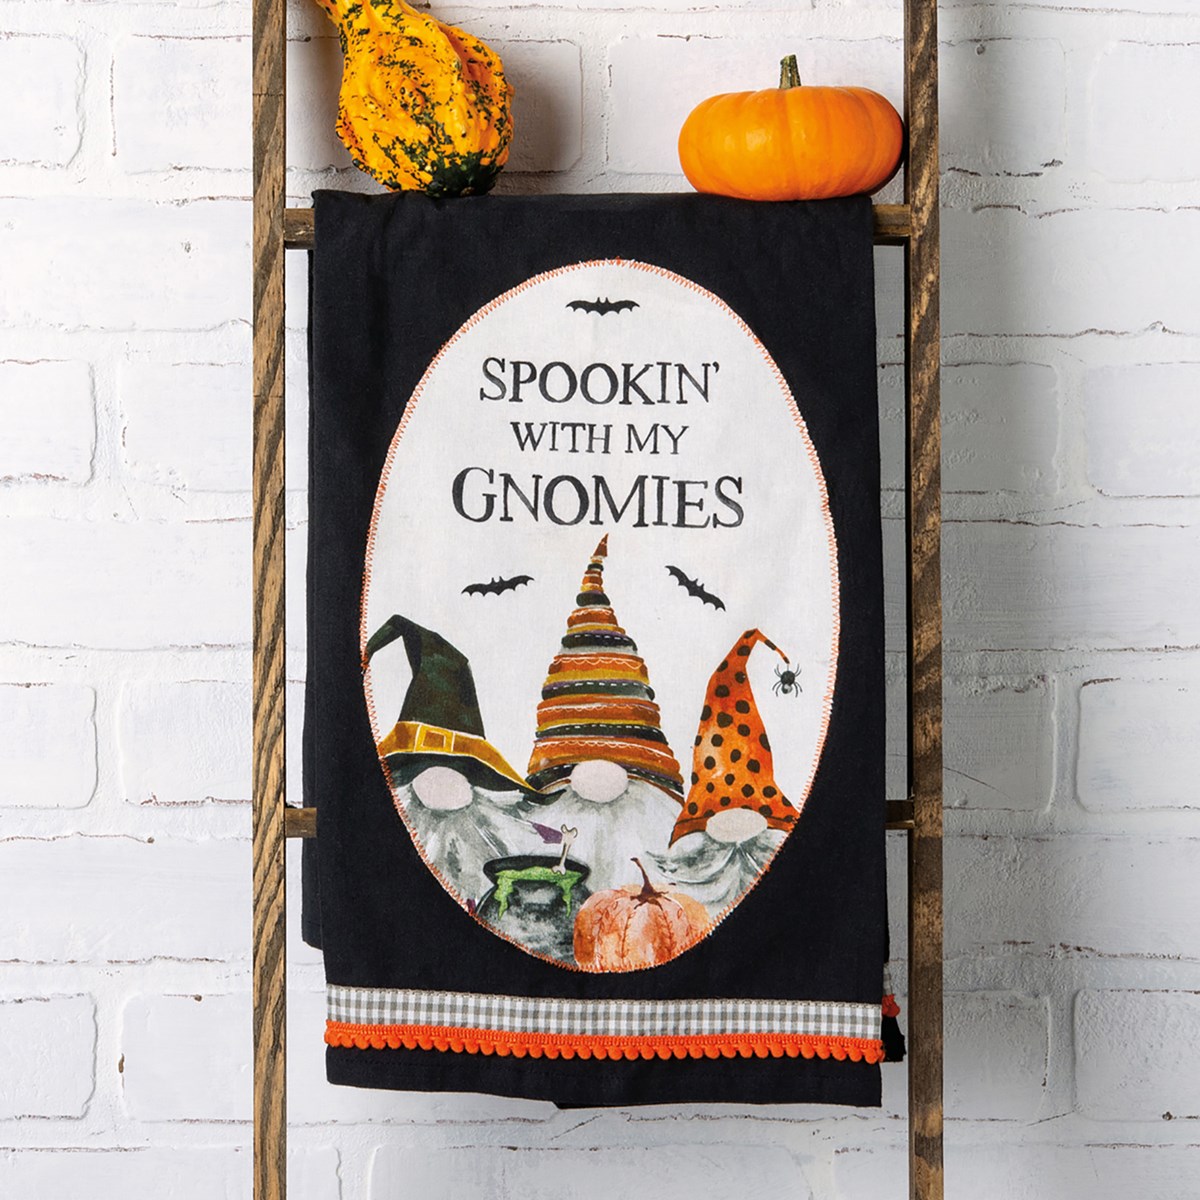 Spookin' With My Gnomies Kitchen Towel - Cotton, Ribbon